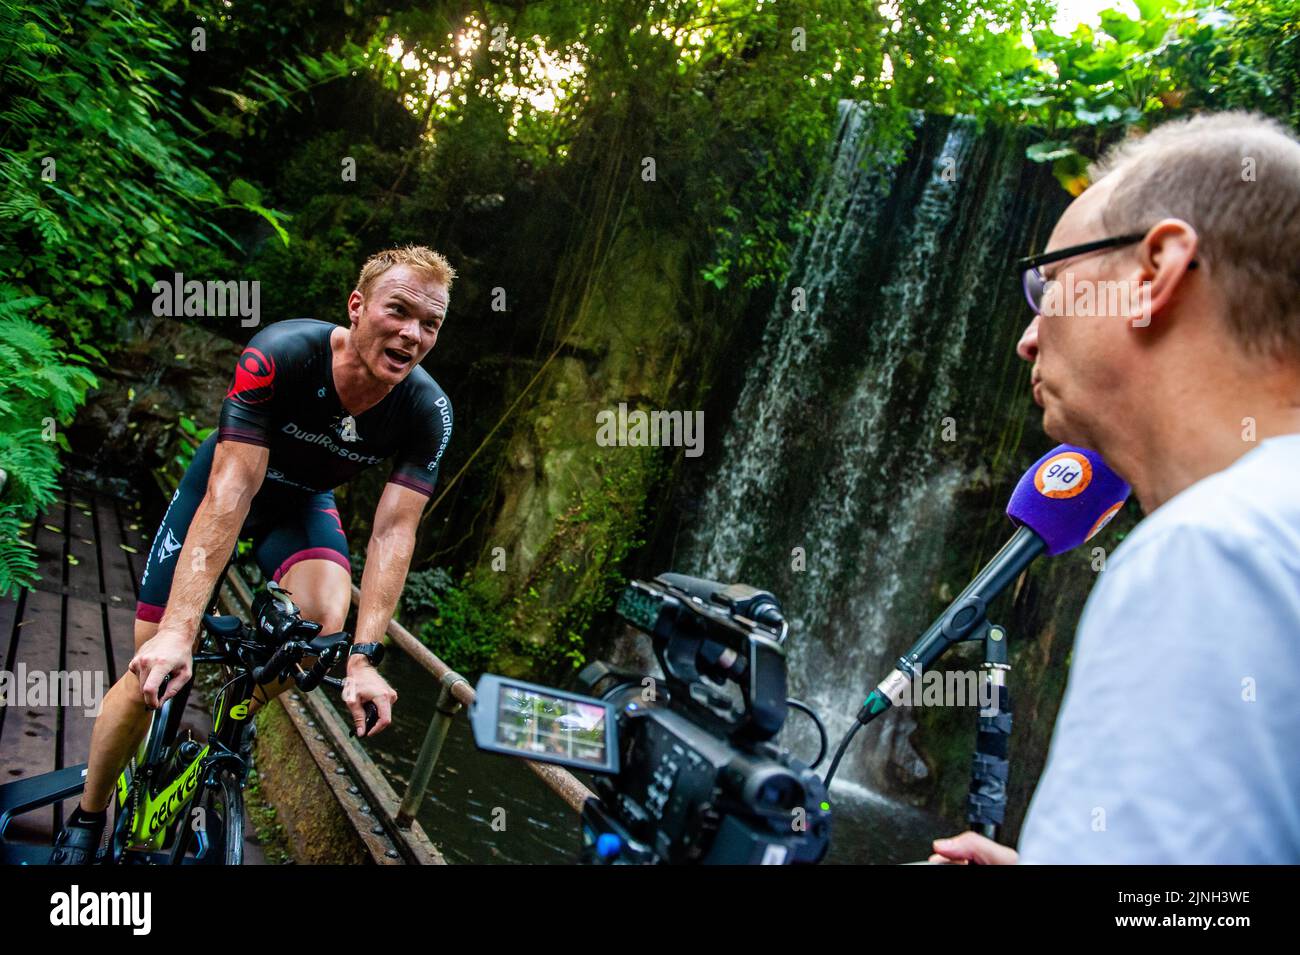 A journalist seen interviewing athlete Olaf Van Den Bergh during his training. Dutch top athlete Olaf Van Den Bergh starts training in the indoor tropical rainforest of the Burgers' Zoo in Arnhem, in preparation for the Ironman World Championships in Kailua-Kona located in Hawaii. The Bush (indoor tropical rainforest) is the ideal training location because of the high humidity and temperature. (Photo by Ana Fernandez / SOPA Images/Sipa USA) Stock Photo